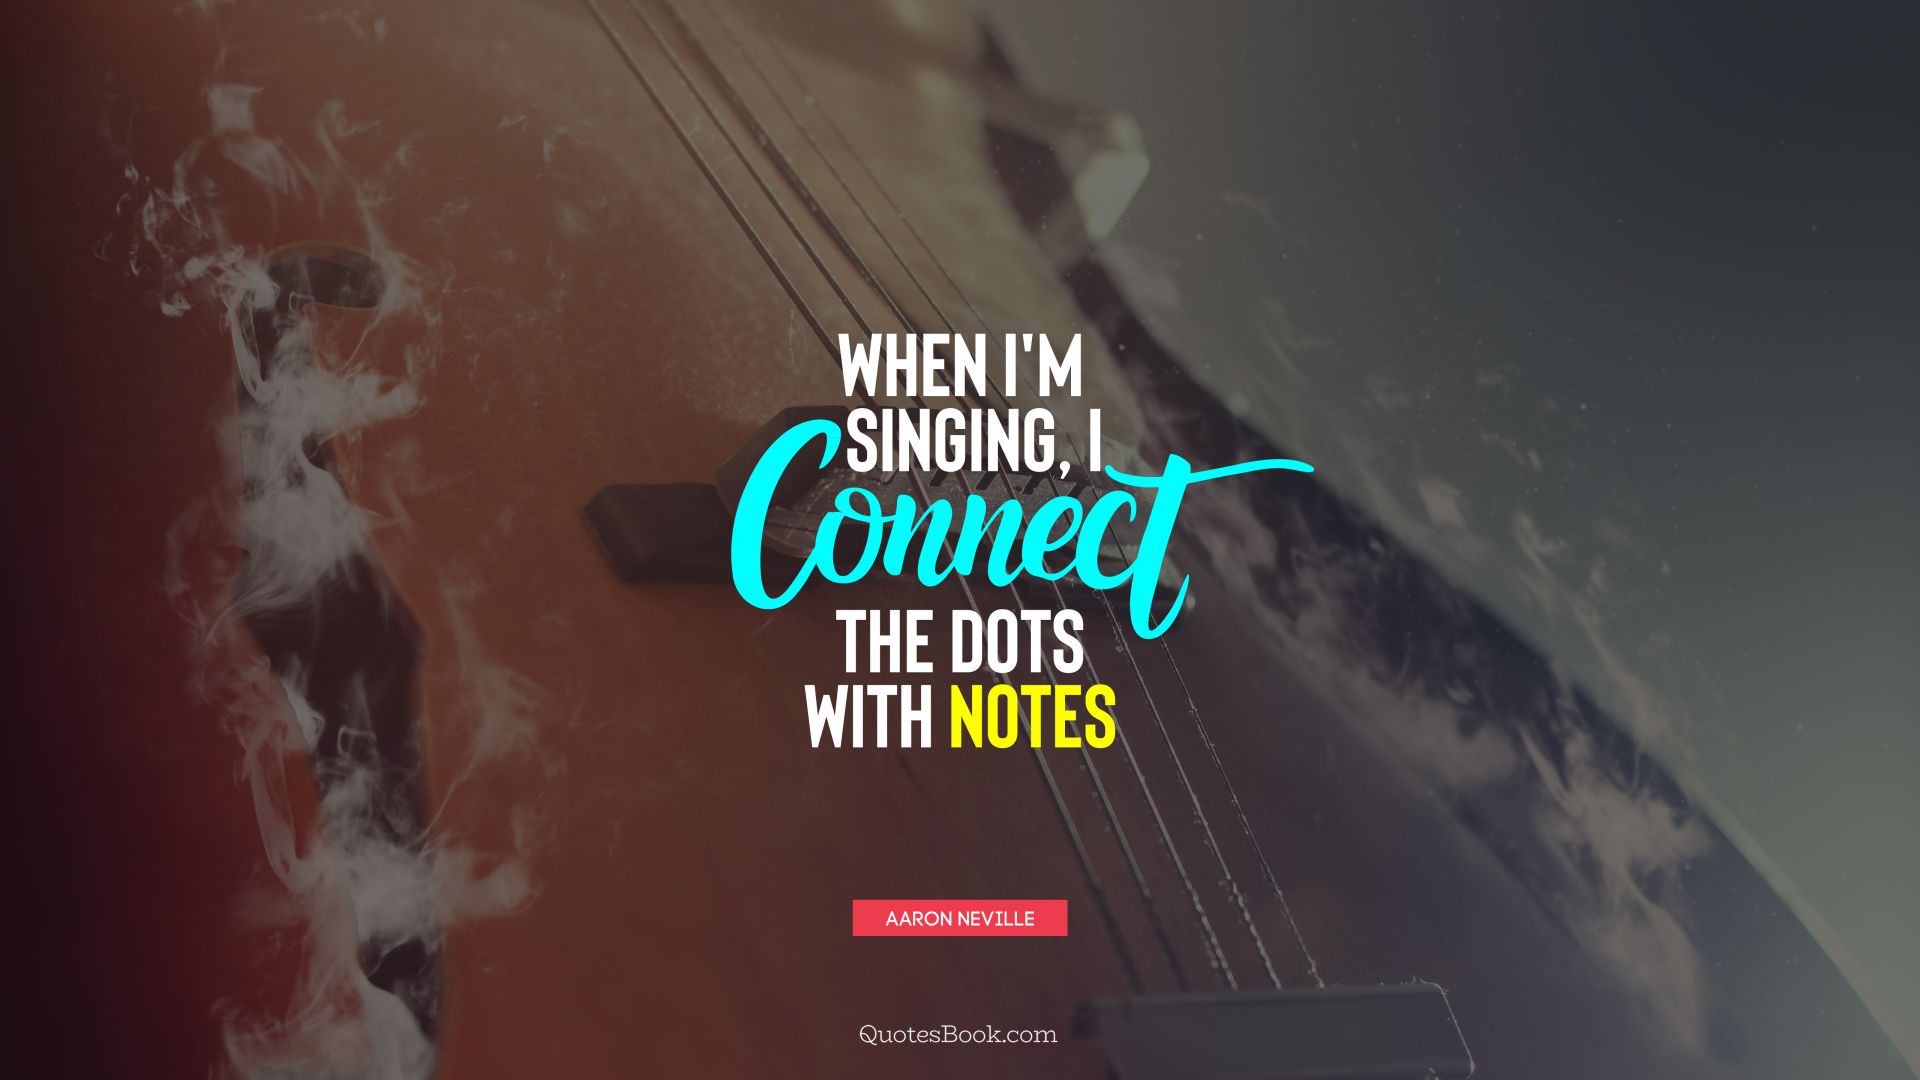 When I'm singing, I connect the dots with notes. - Quote by Aaron Neville